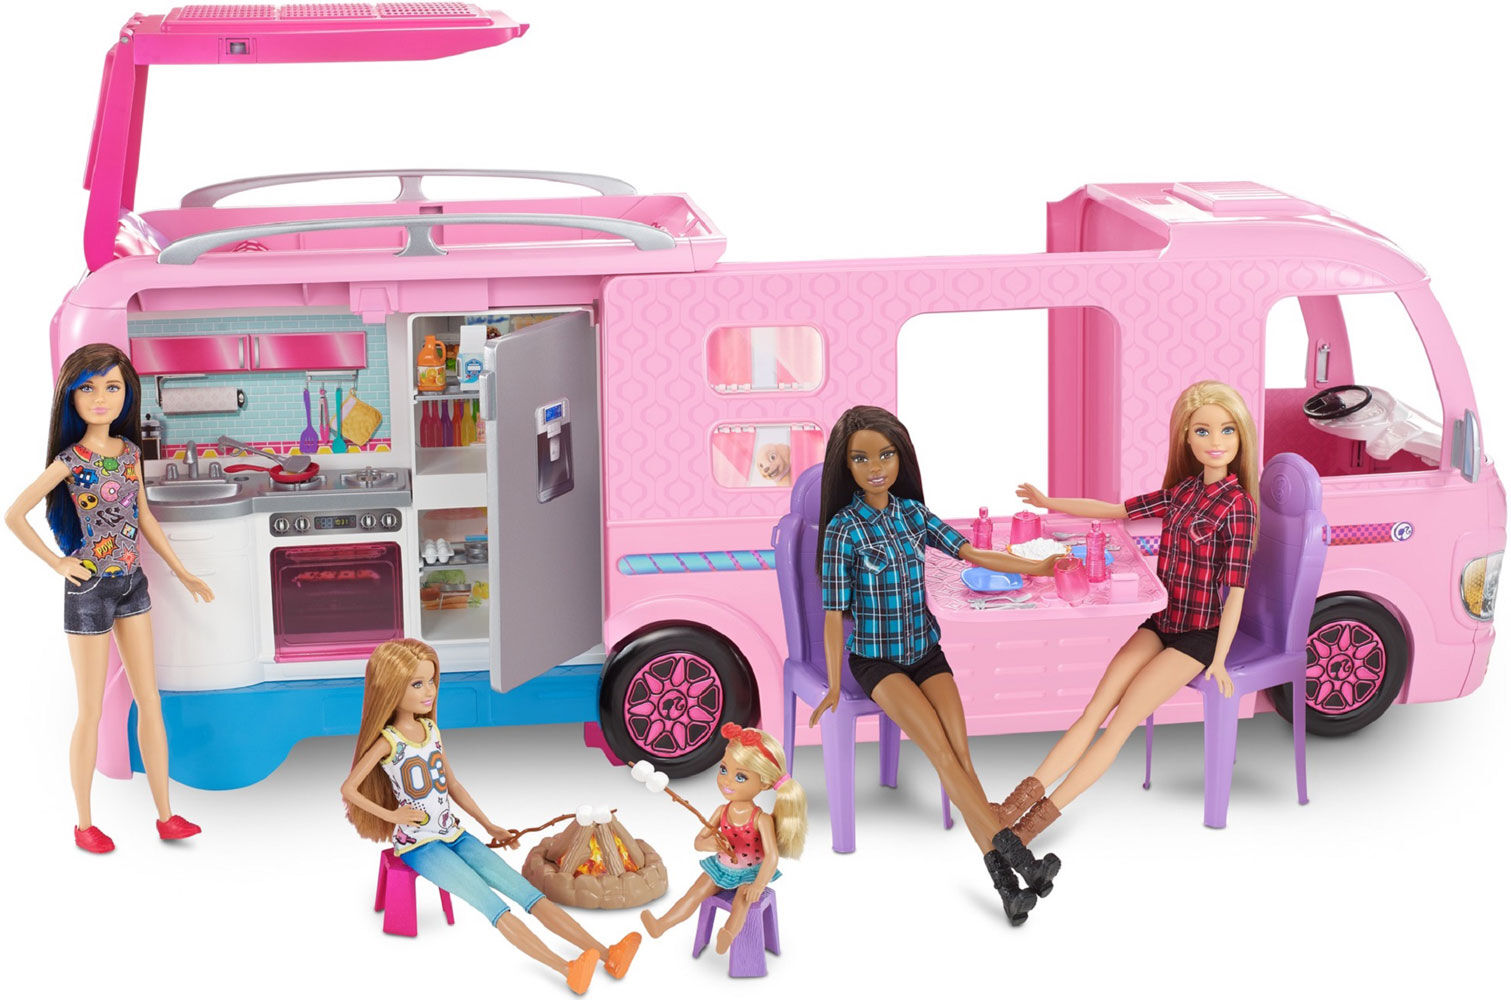 Barbie DreamCamper Playset with Pool | Toys R Us Canada